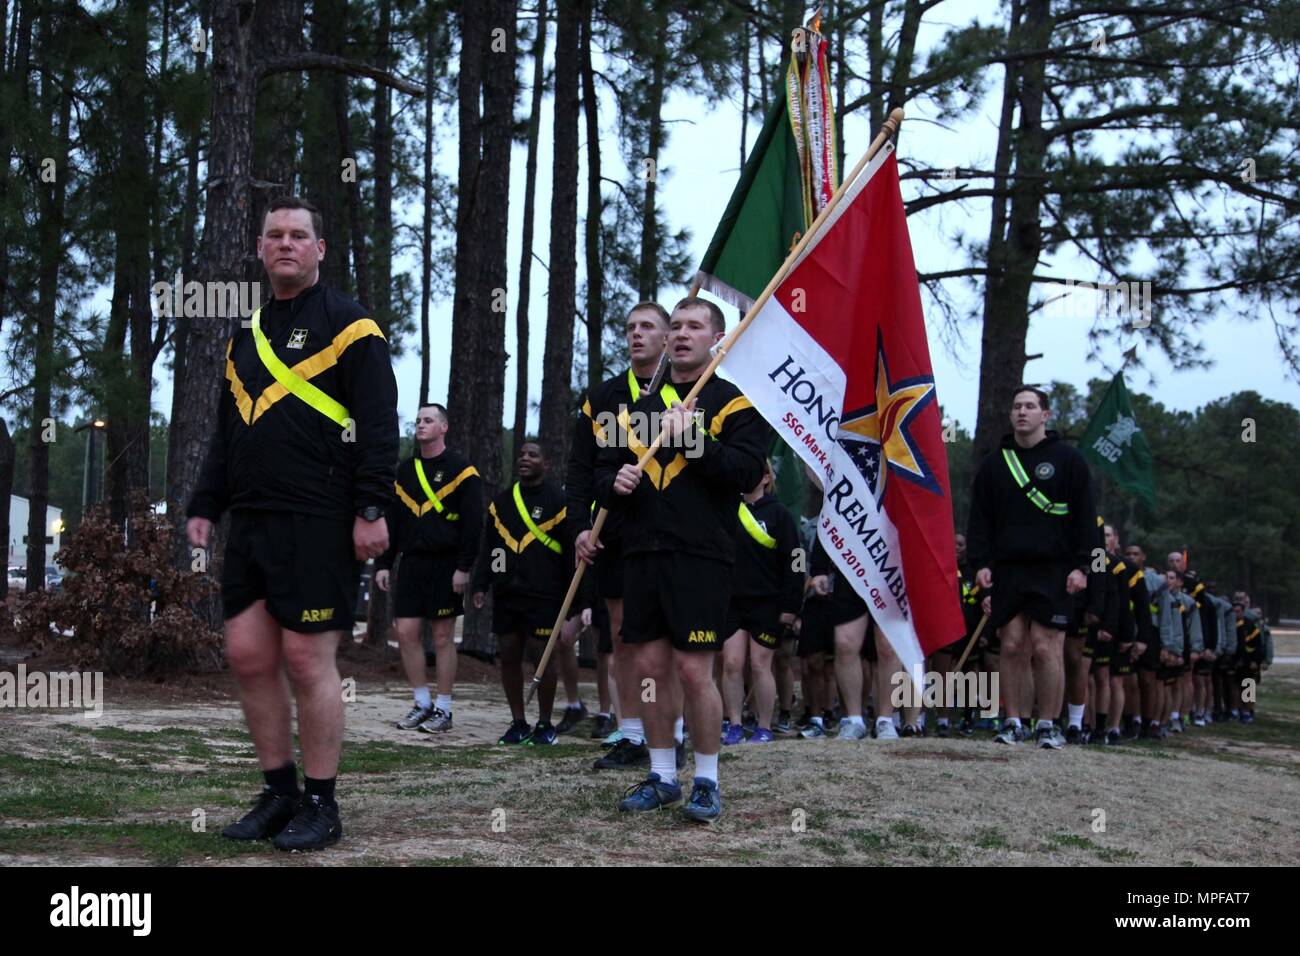 Lt. Col. Marcus Welch, commander of 8th Military Information Support Battalion, 4th Military Information Support Group, returns from a four-mile run with his Paratroopers on Feb. 3, 2017, honoring Staff Sgt. Mark Stets, Jr., who was killed in action Feb. 3, 2010. Unit leaders and Stets’ parents took time before and after the run to speak of their memories of the fallen Soldier. The formation ran with Stets’ “Honor and Remember” flag in front of the battalion colors. Stock Photo